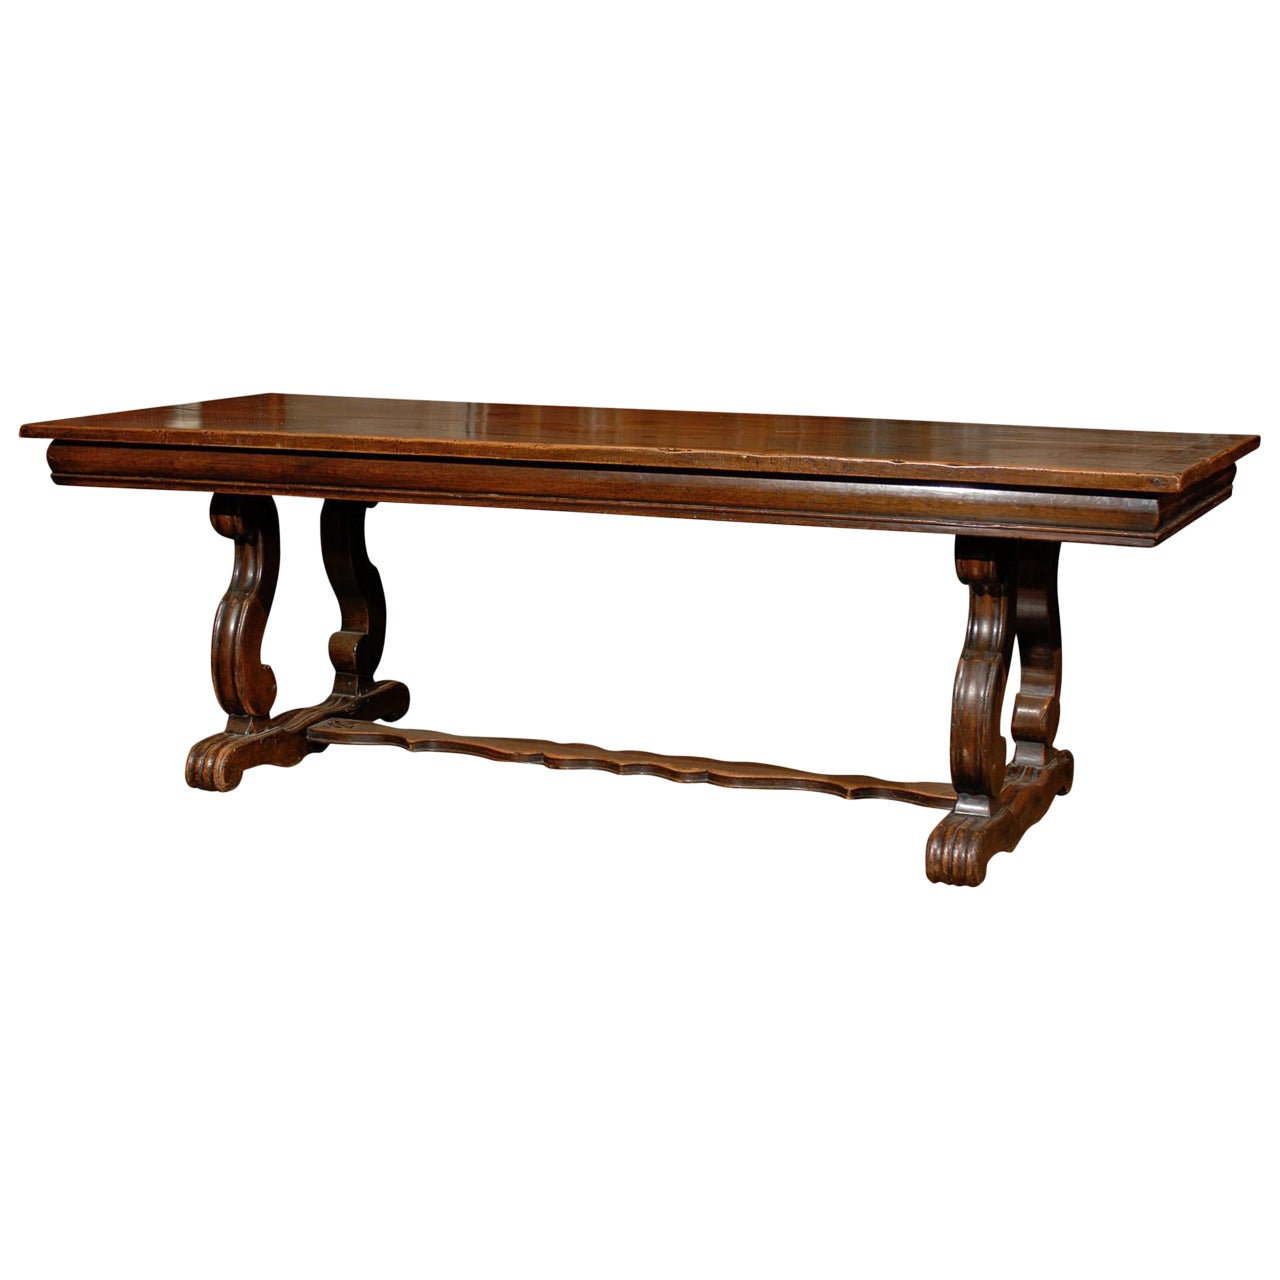 19th Century French Walnut Dining Table with Lyre Shaped Legs